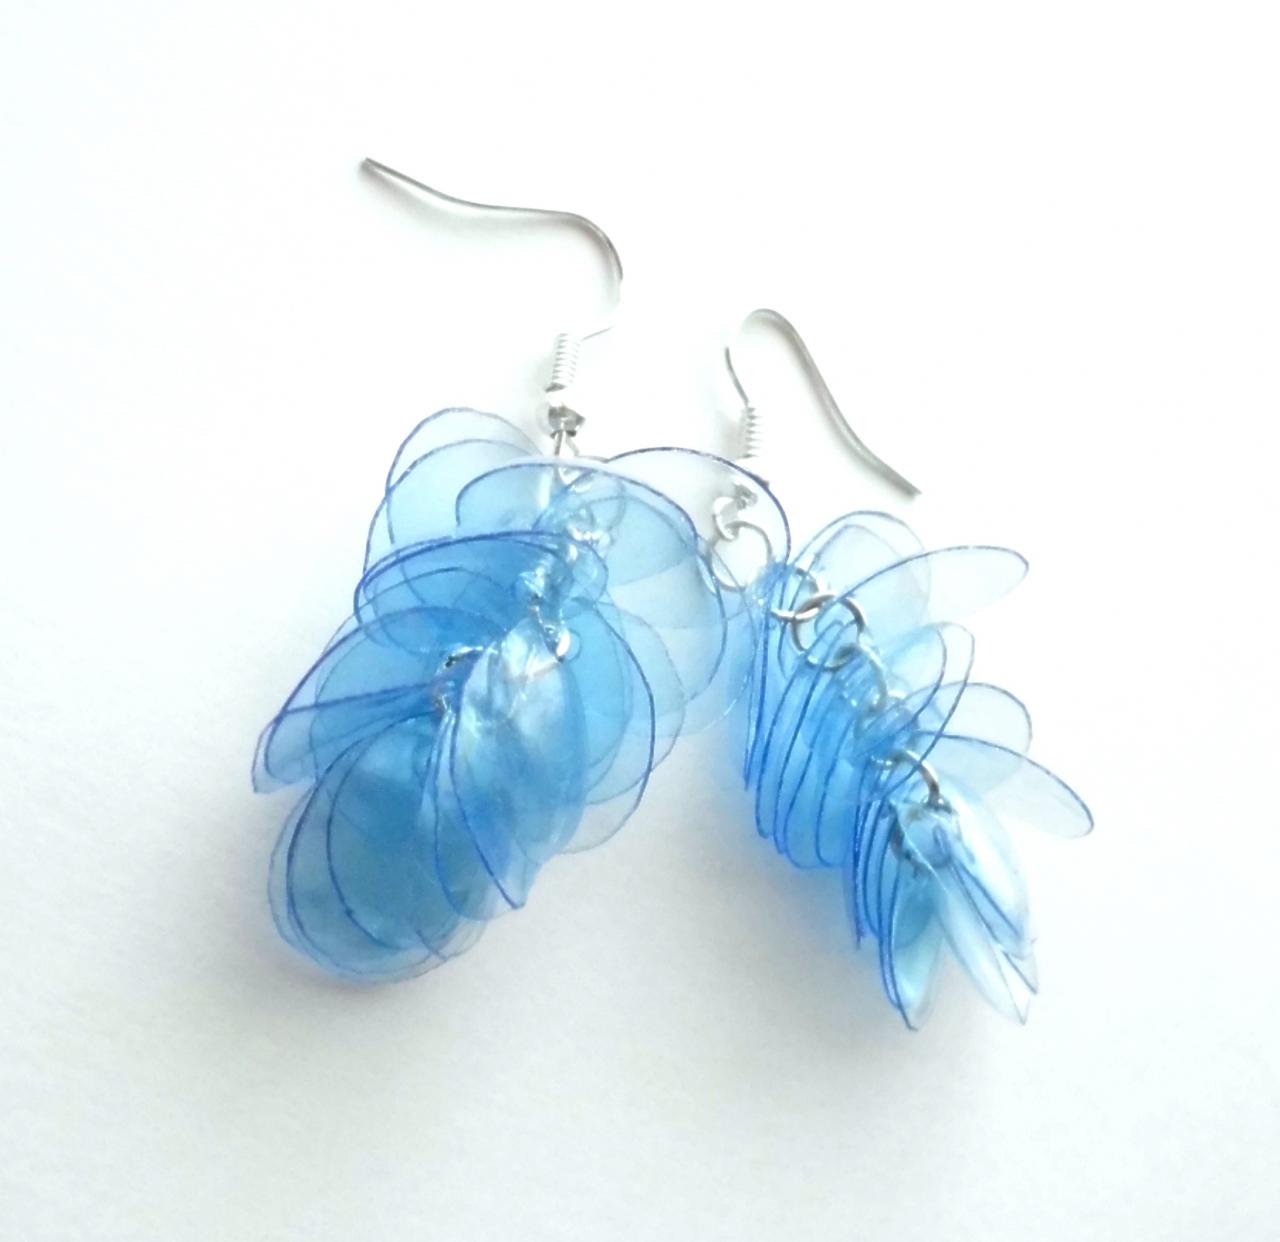 Blue Earrings Made Of Recycled Plastic Water Bottle - Upcycled Jewelry, Eco-friendly, Sustainable, Repurposed, Reclaimed Plastic